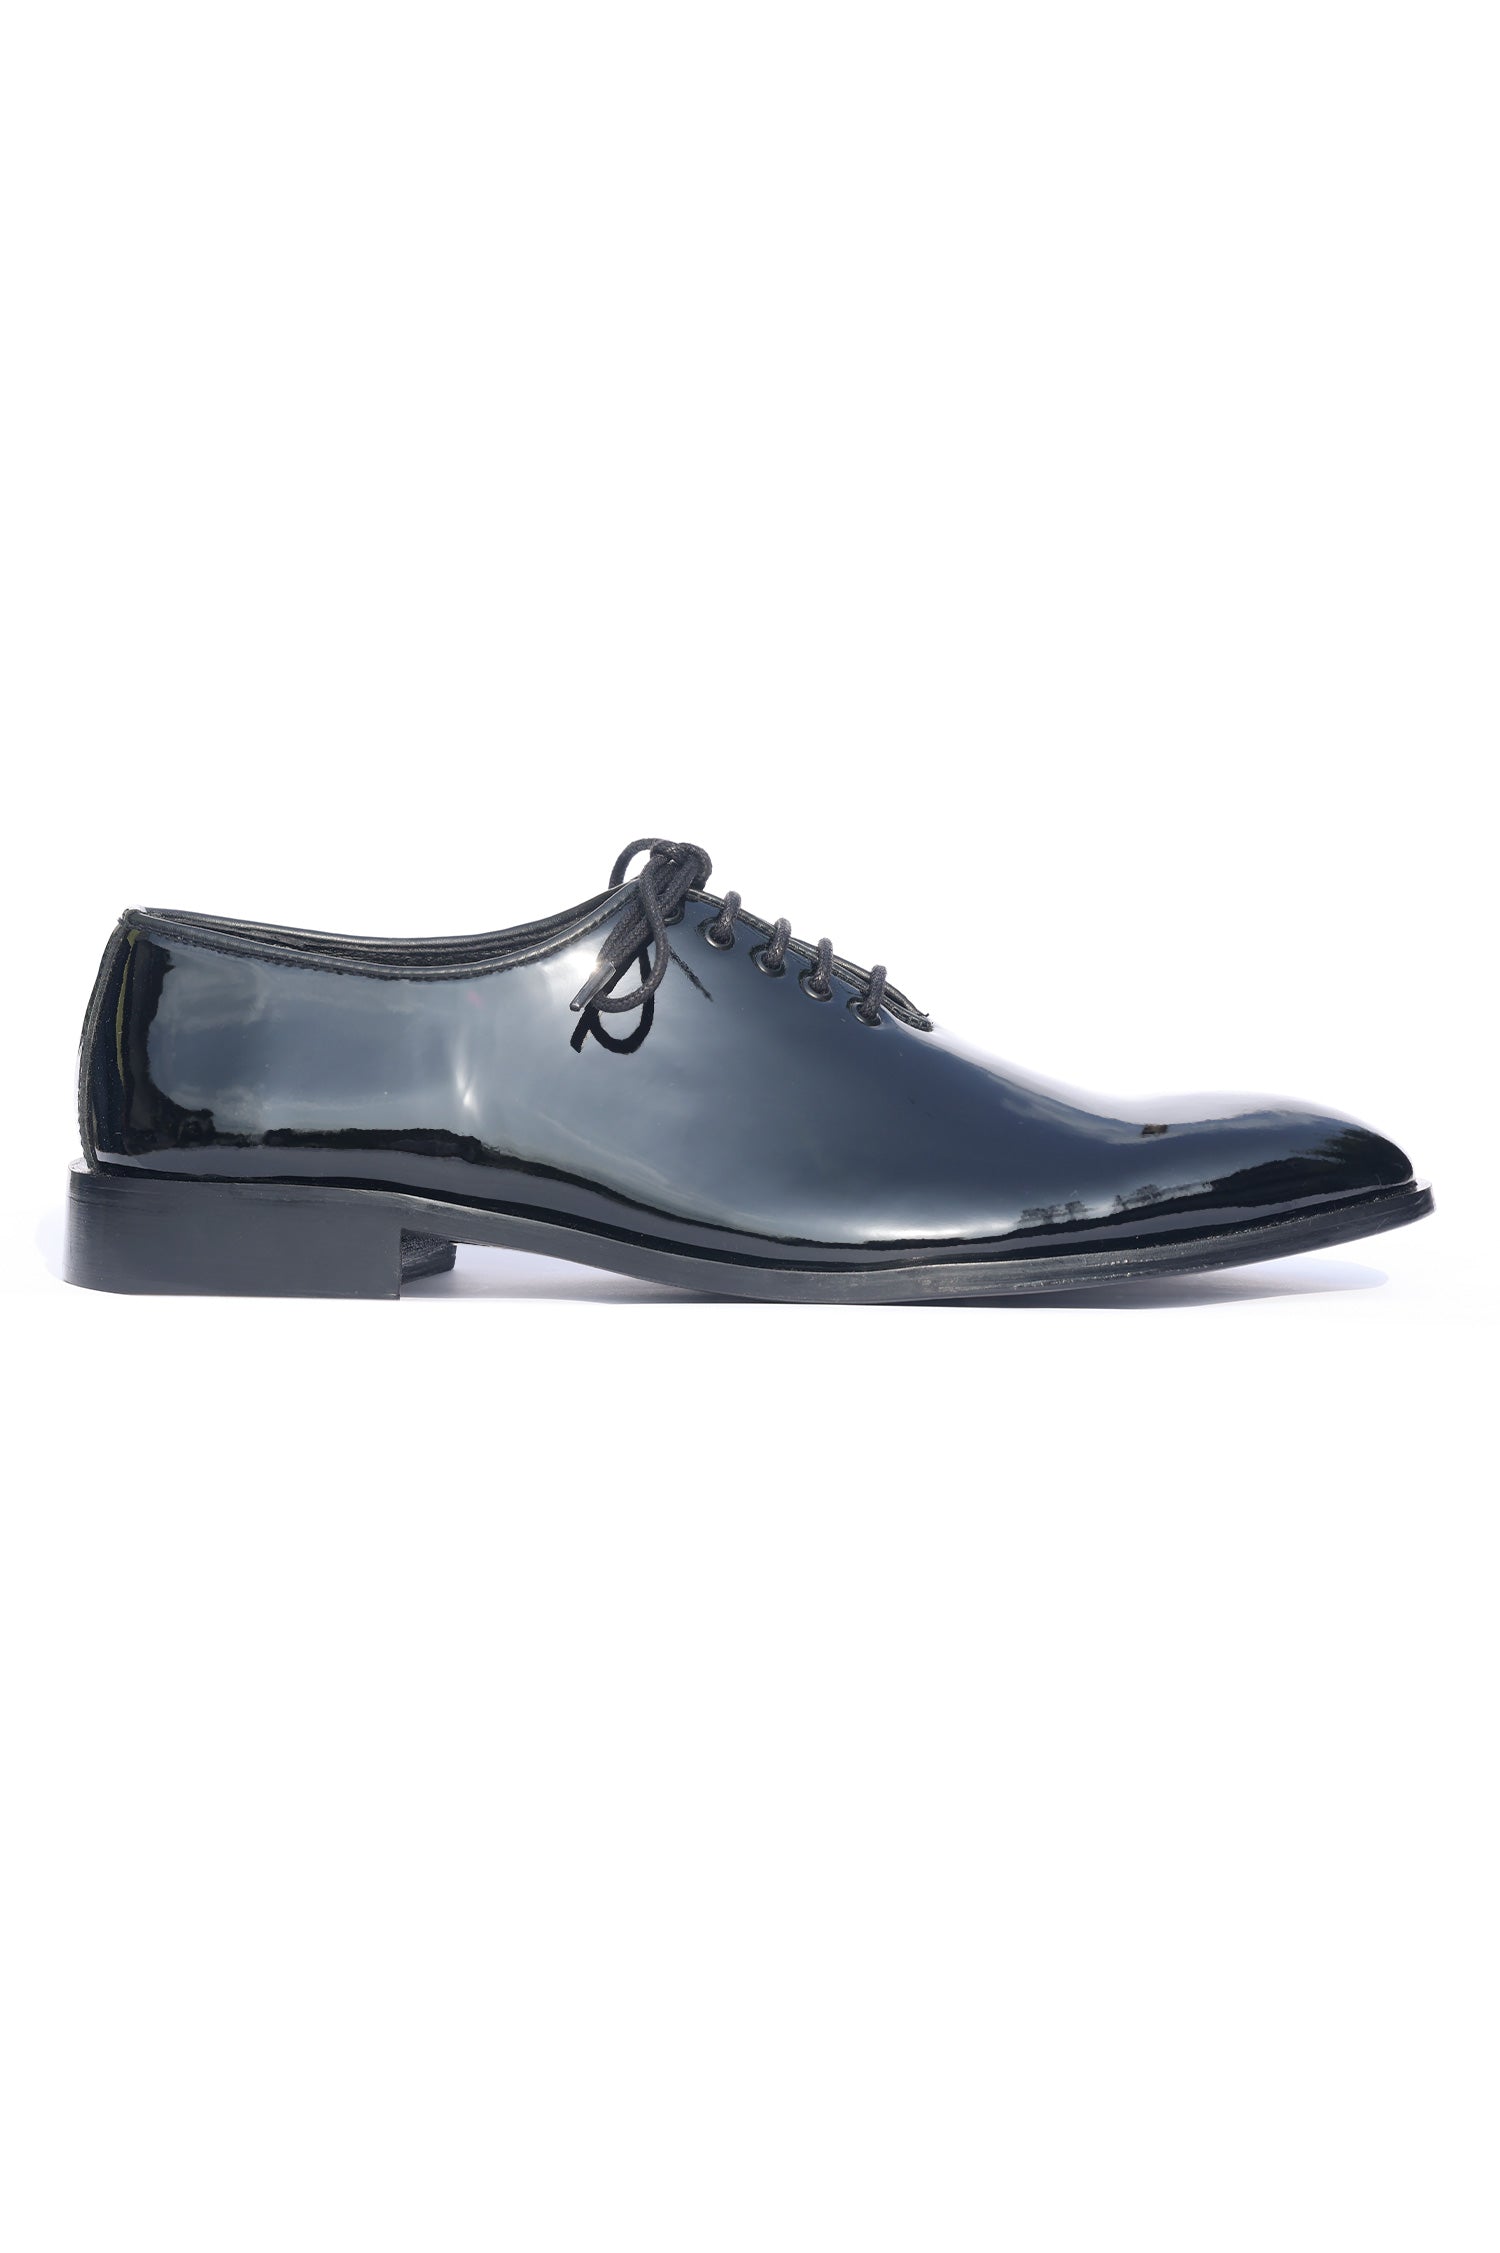 PATENT LEATHER OXFORDS-BLACK